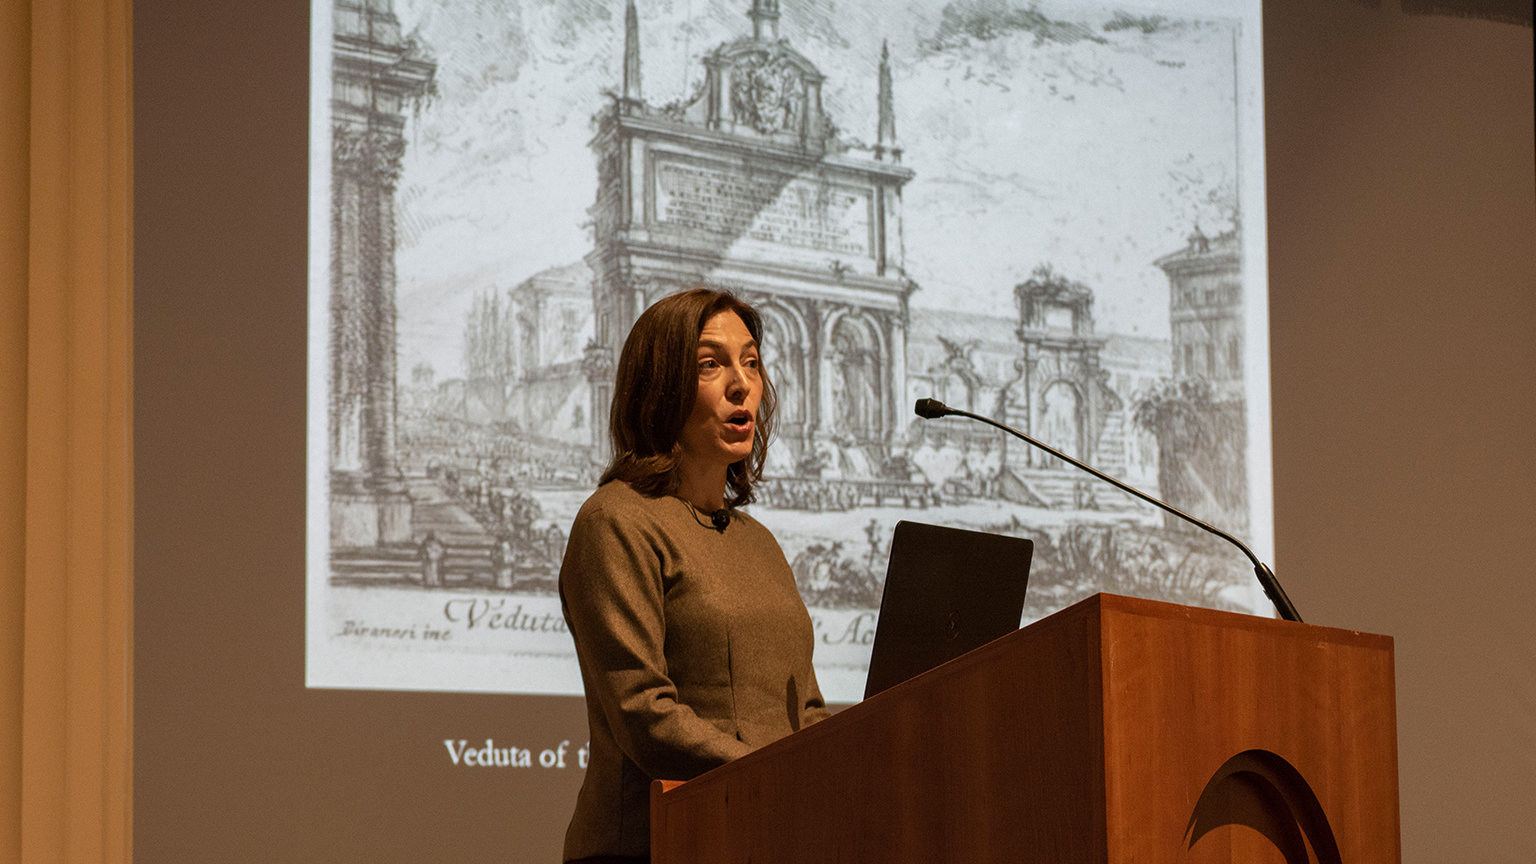 Heather Hyde Minor presented the 2020 Academy of Medicine Lecture on Classical Architecture with What Piranesi Drew